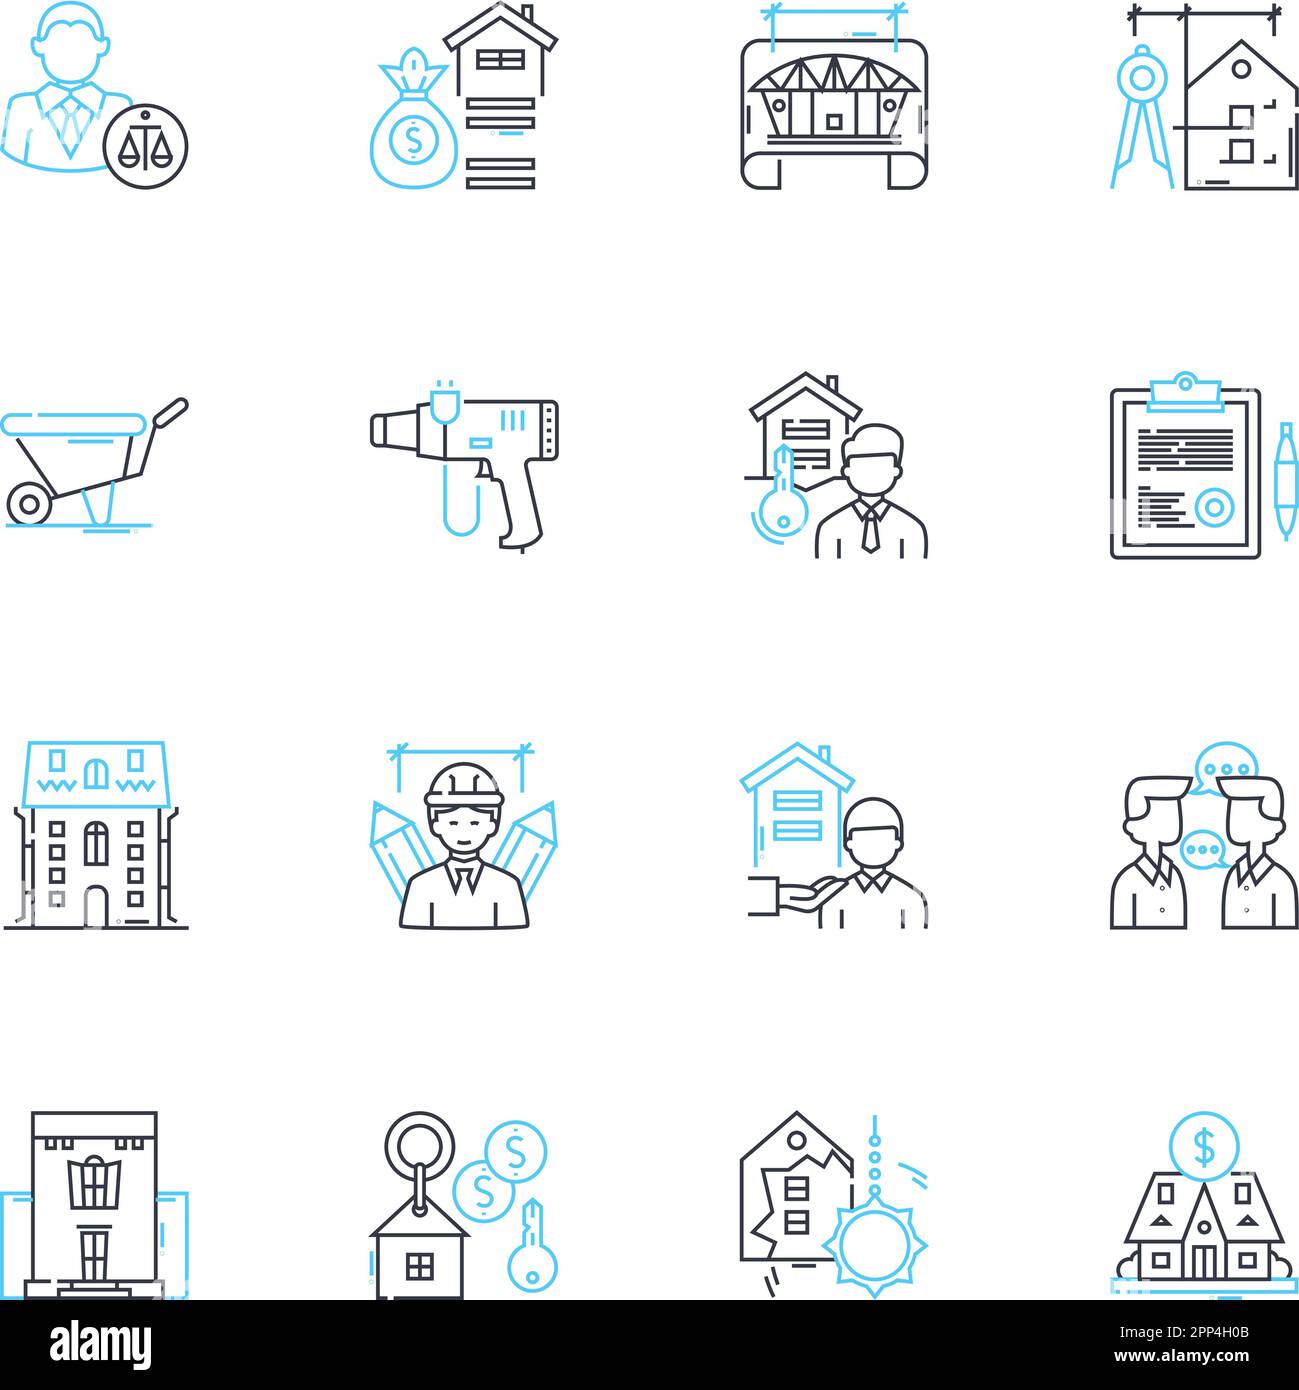 Town expansion linear icons set. Growth, Development, Urbanization, Expansion, Progress, Transformation, Revitalization line vector and concept signs Stock Vector